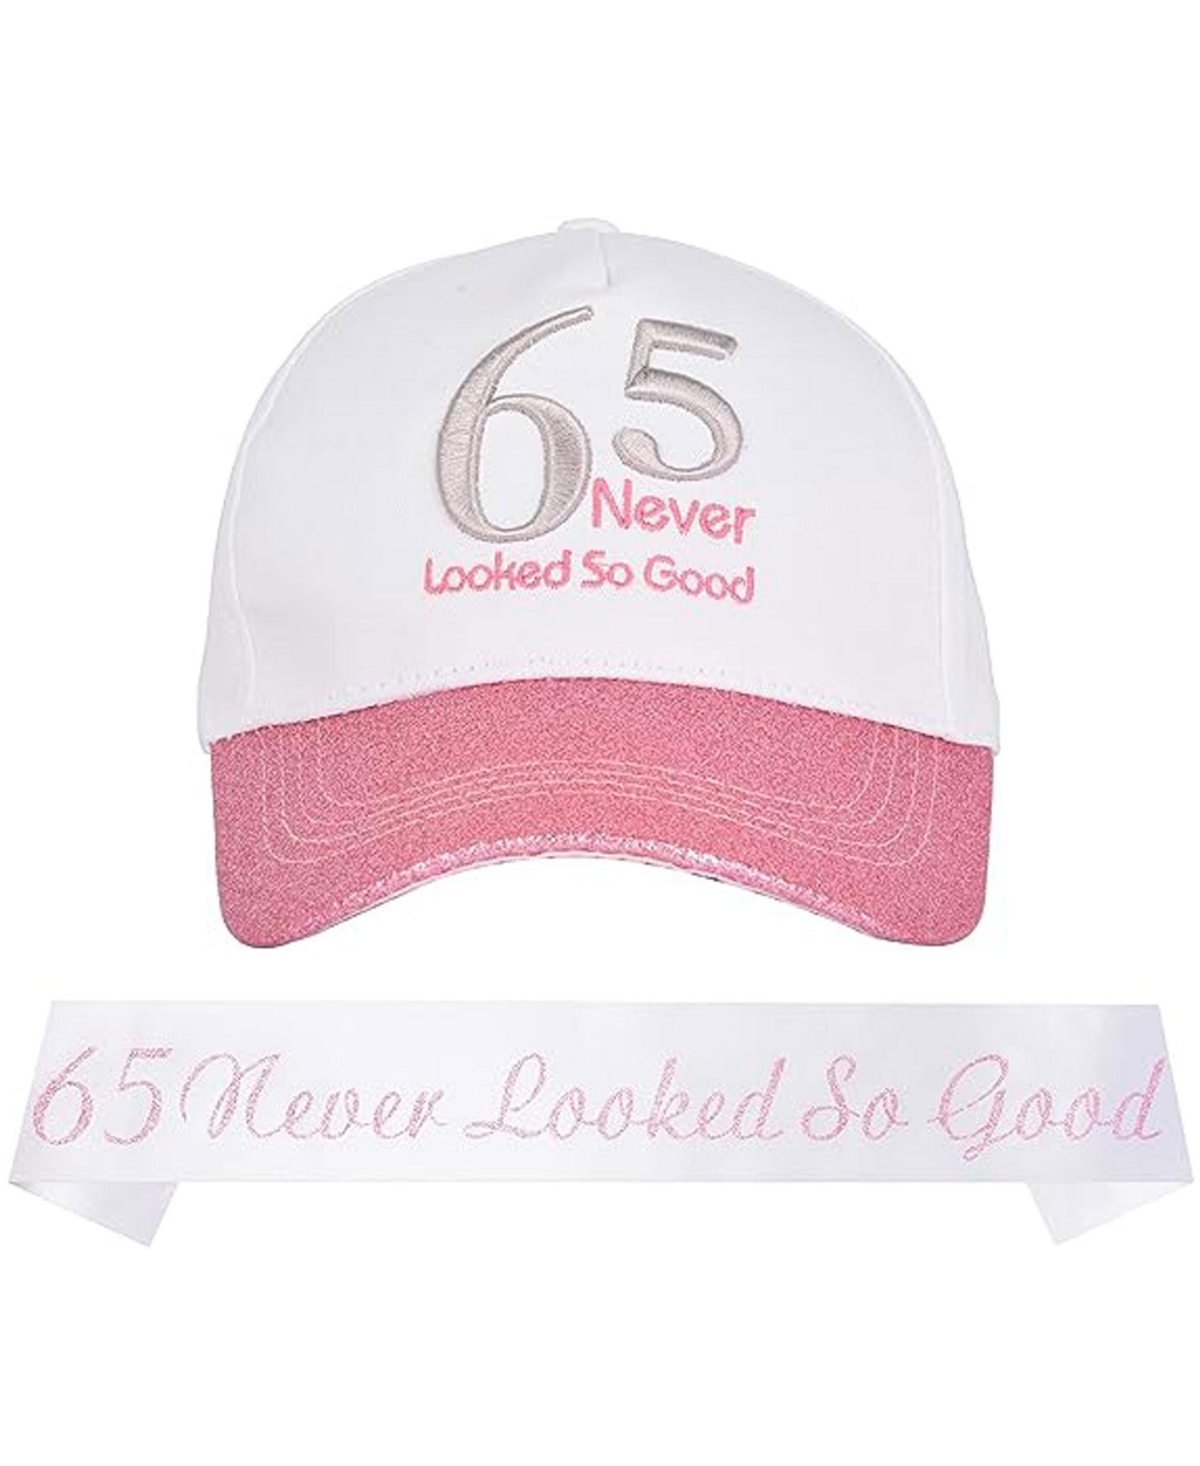 65th Birthday Gifts and Decorations for Women - Stylish Baseball Cap, Elegant Sash, and Party Supplies for a Memorable Celebration - White